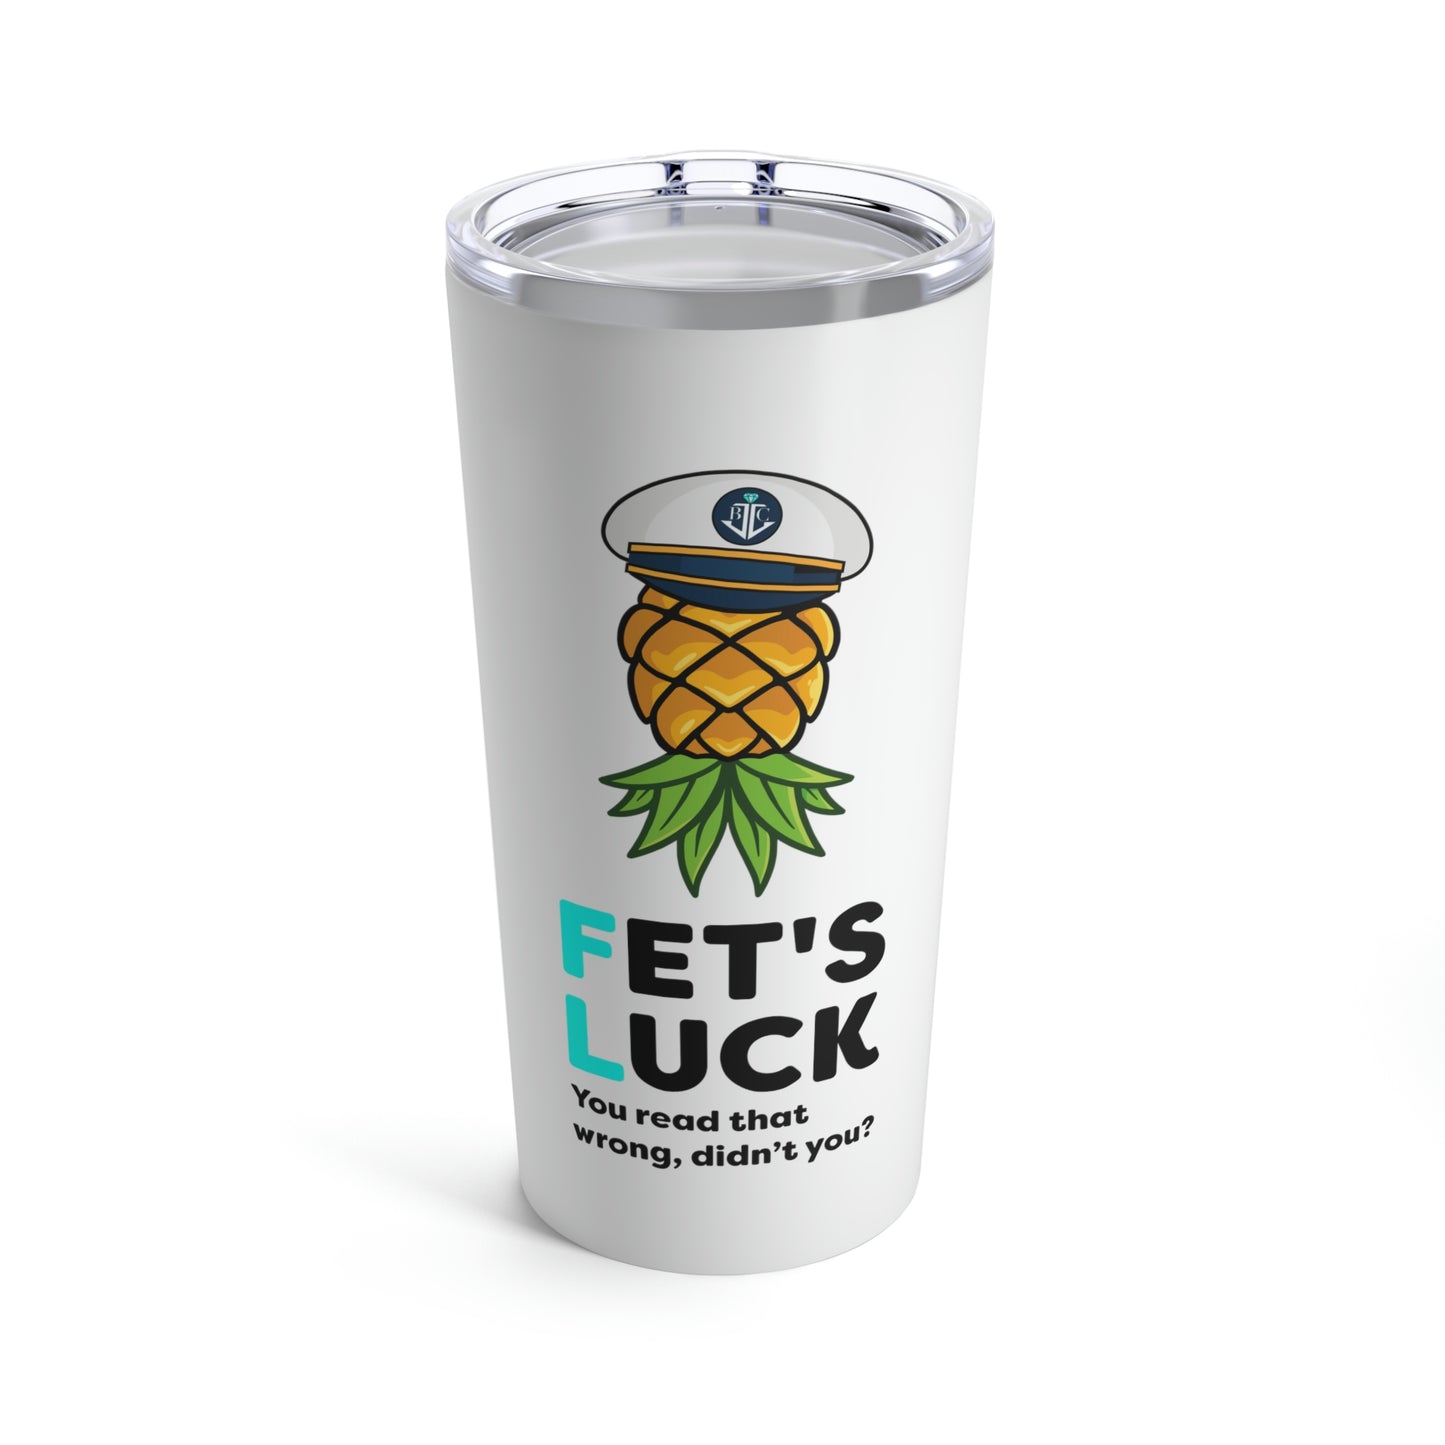 Fet's Luck You read that wrong didn't you?–Pineapple Captain–Tumbler 20oz